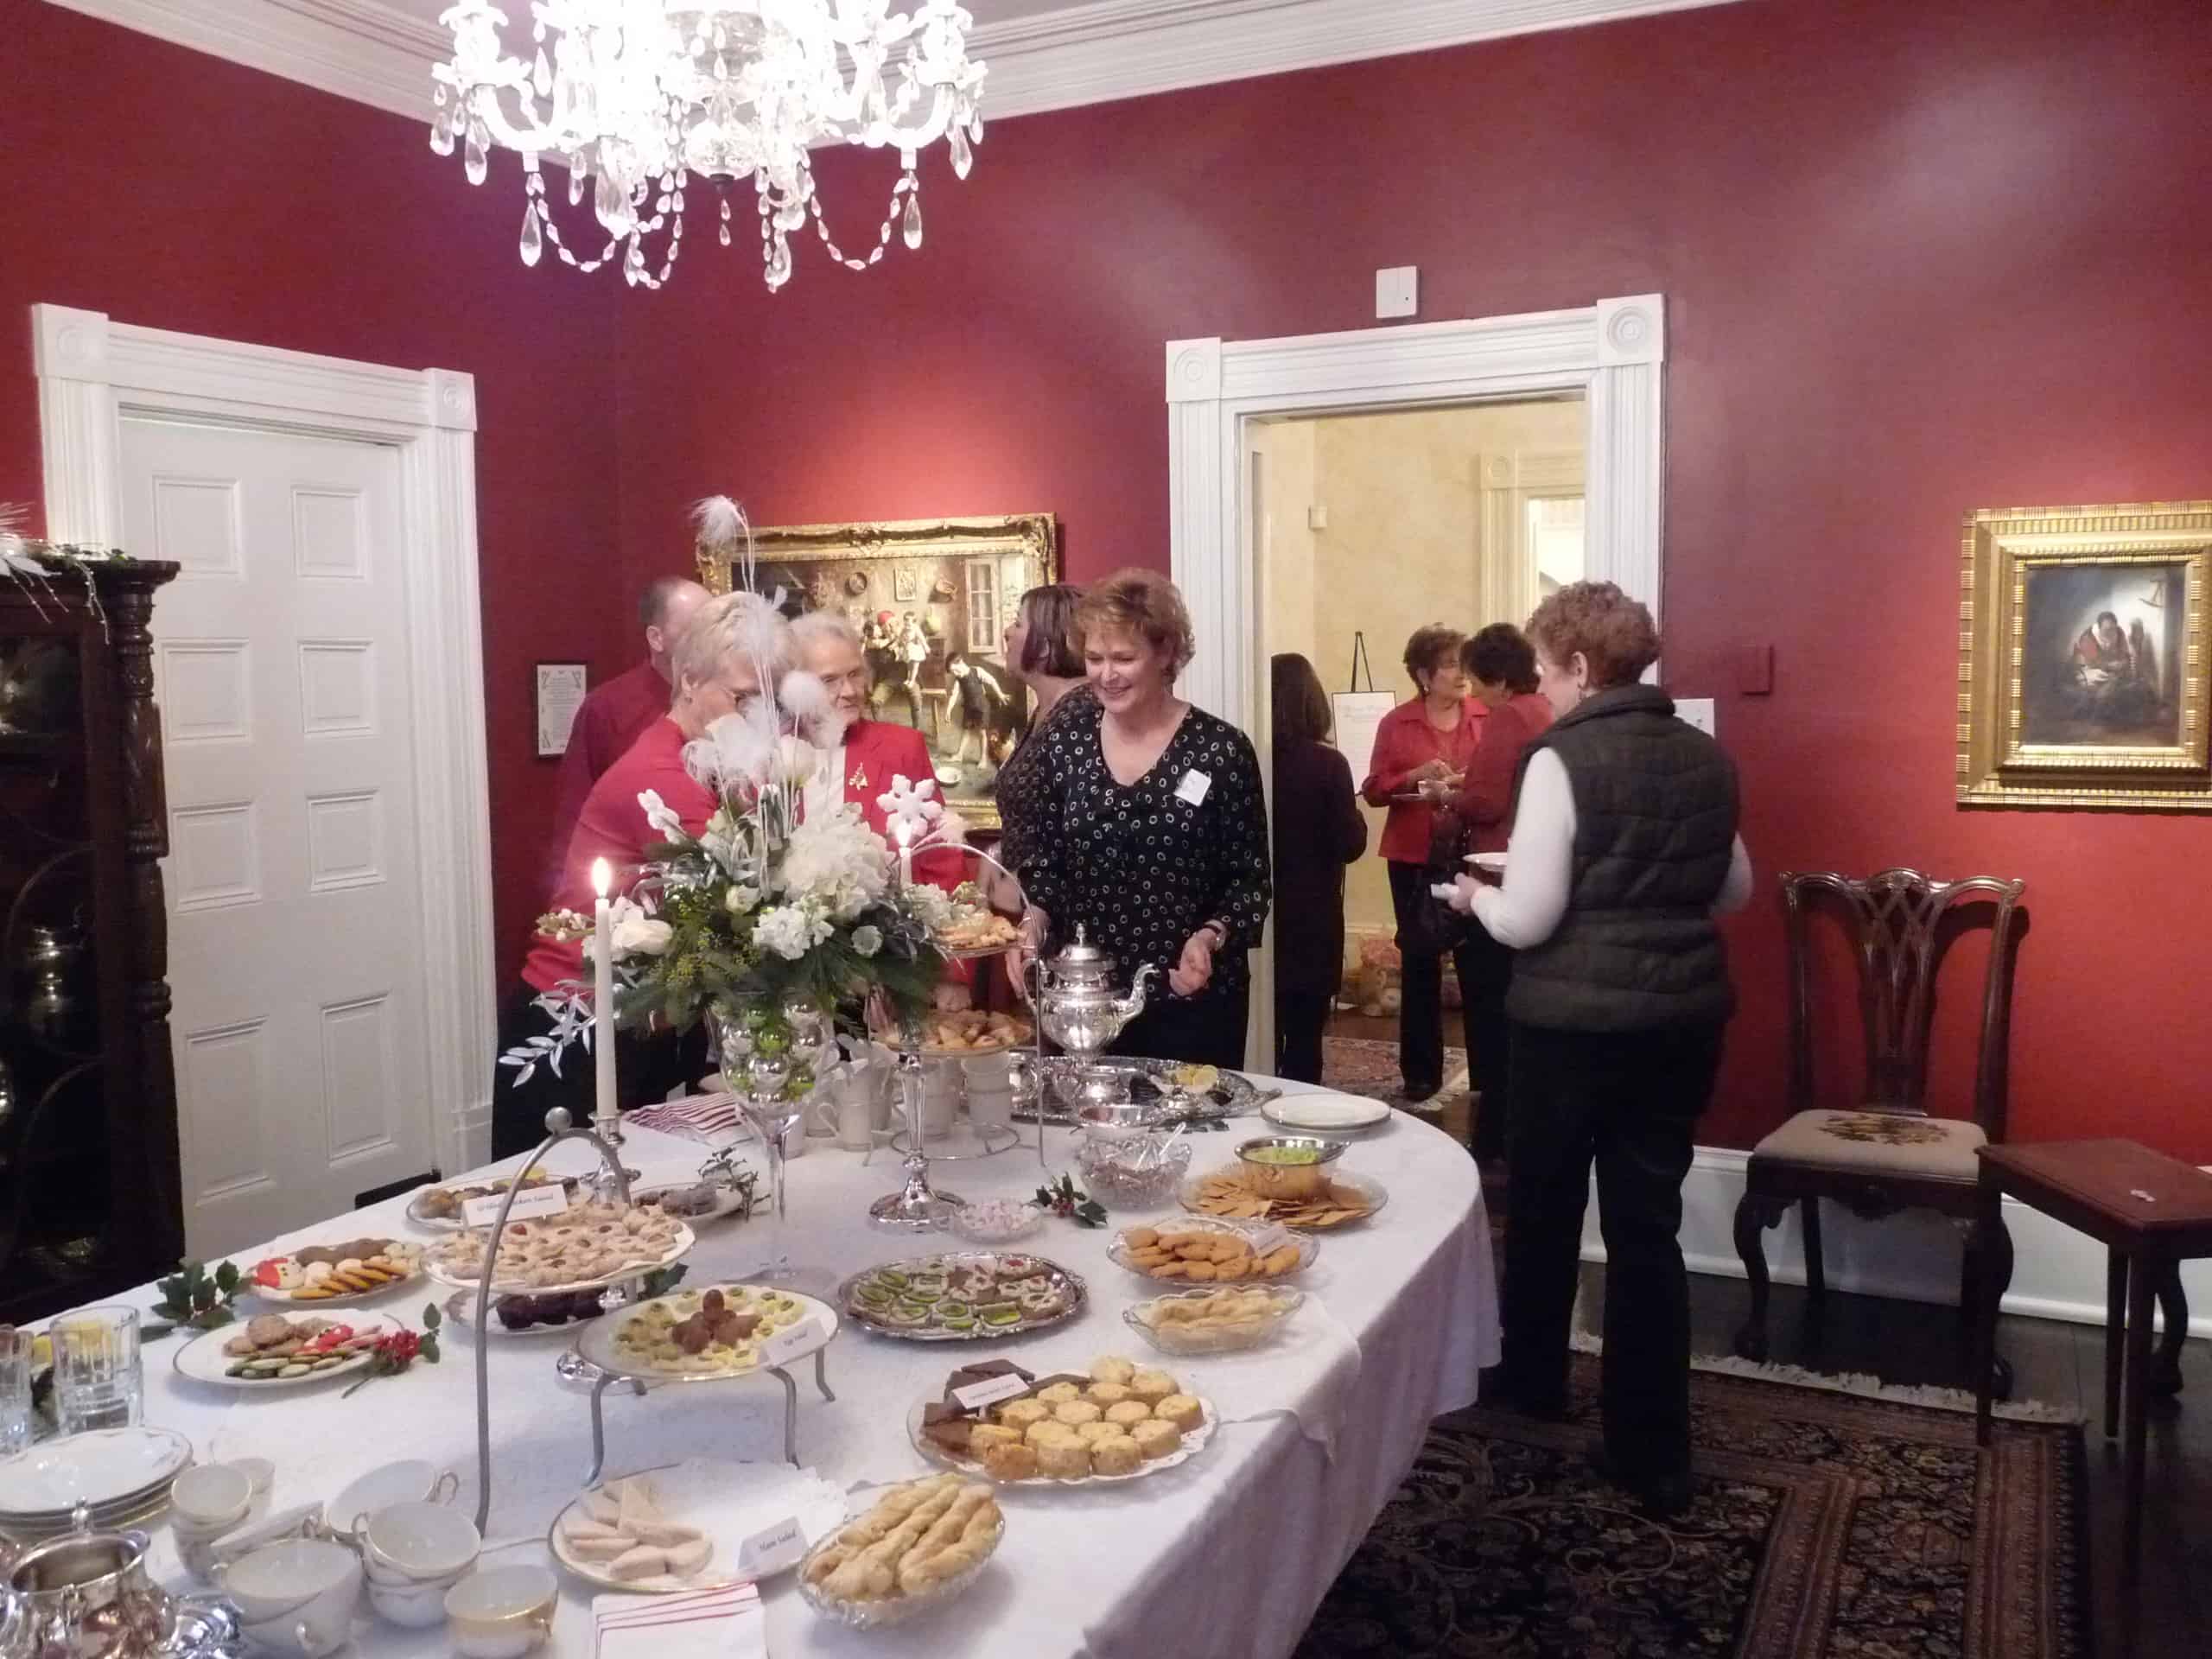 The dining room of Elston Homestead during the Holiday Tea